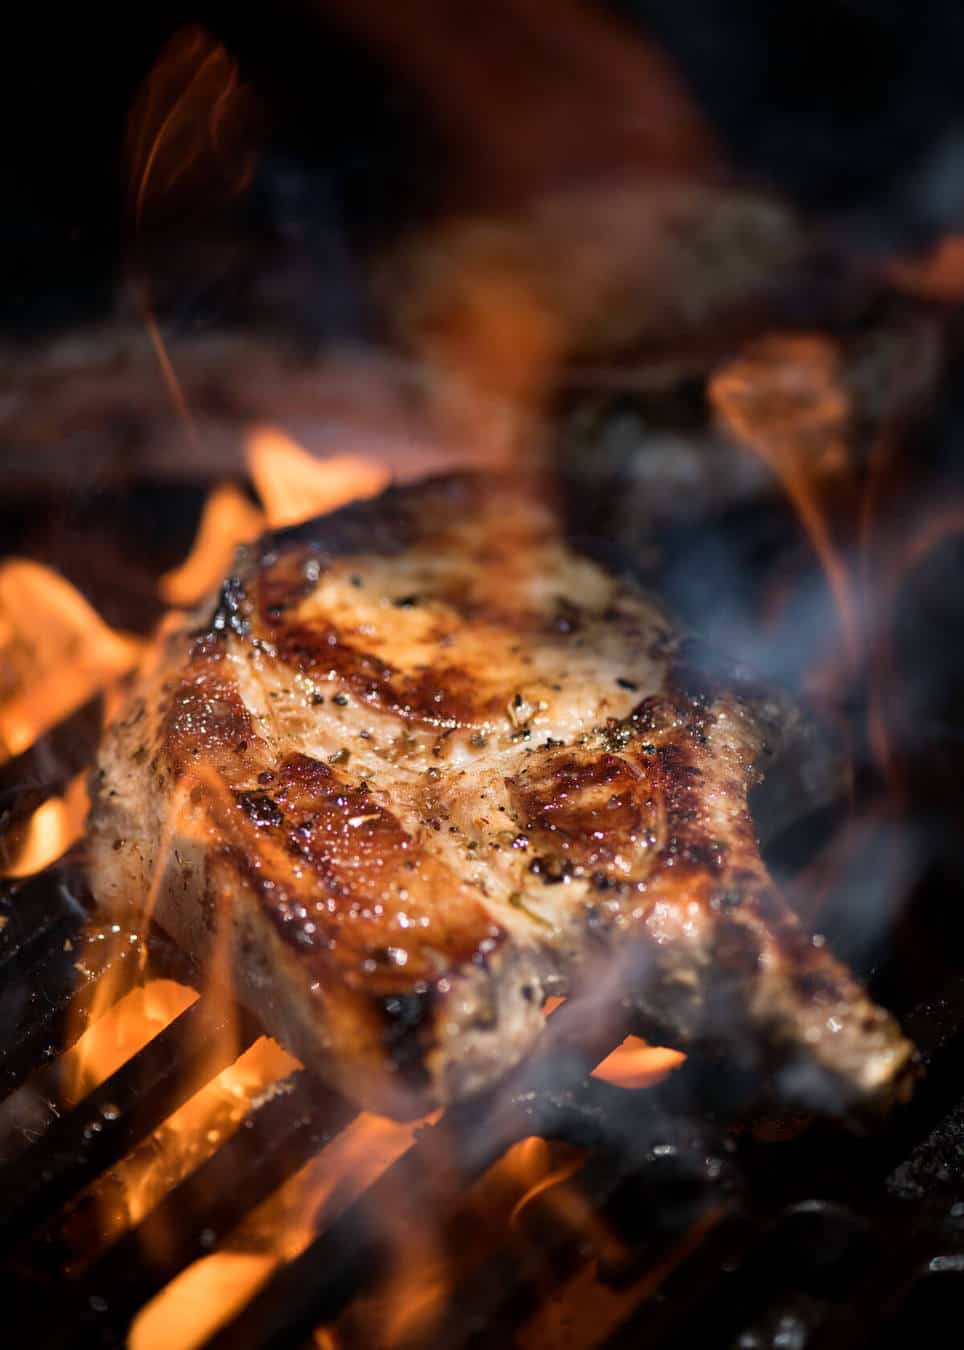 Lemon Garlic Marinated Grilled Pork Chops on the barbecue being licked by flames.